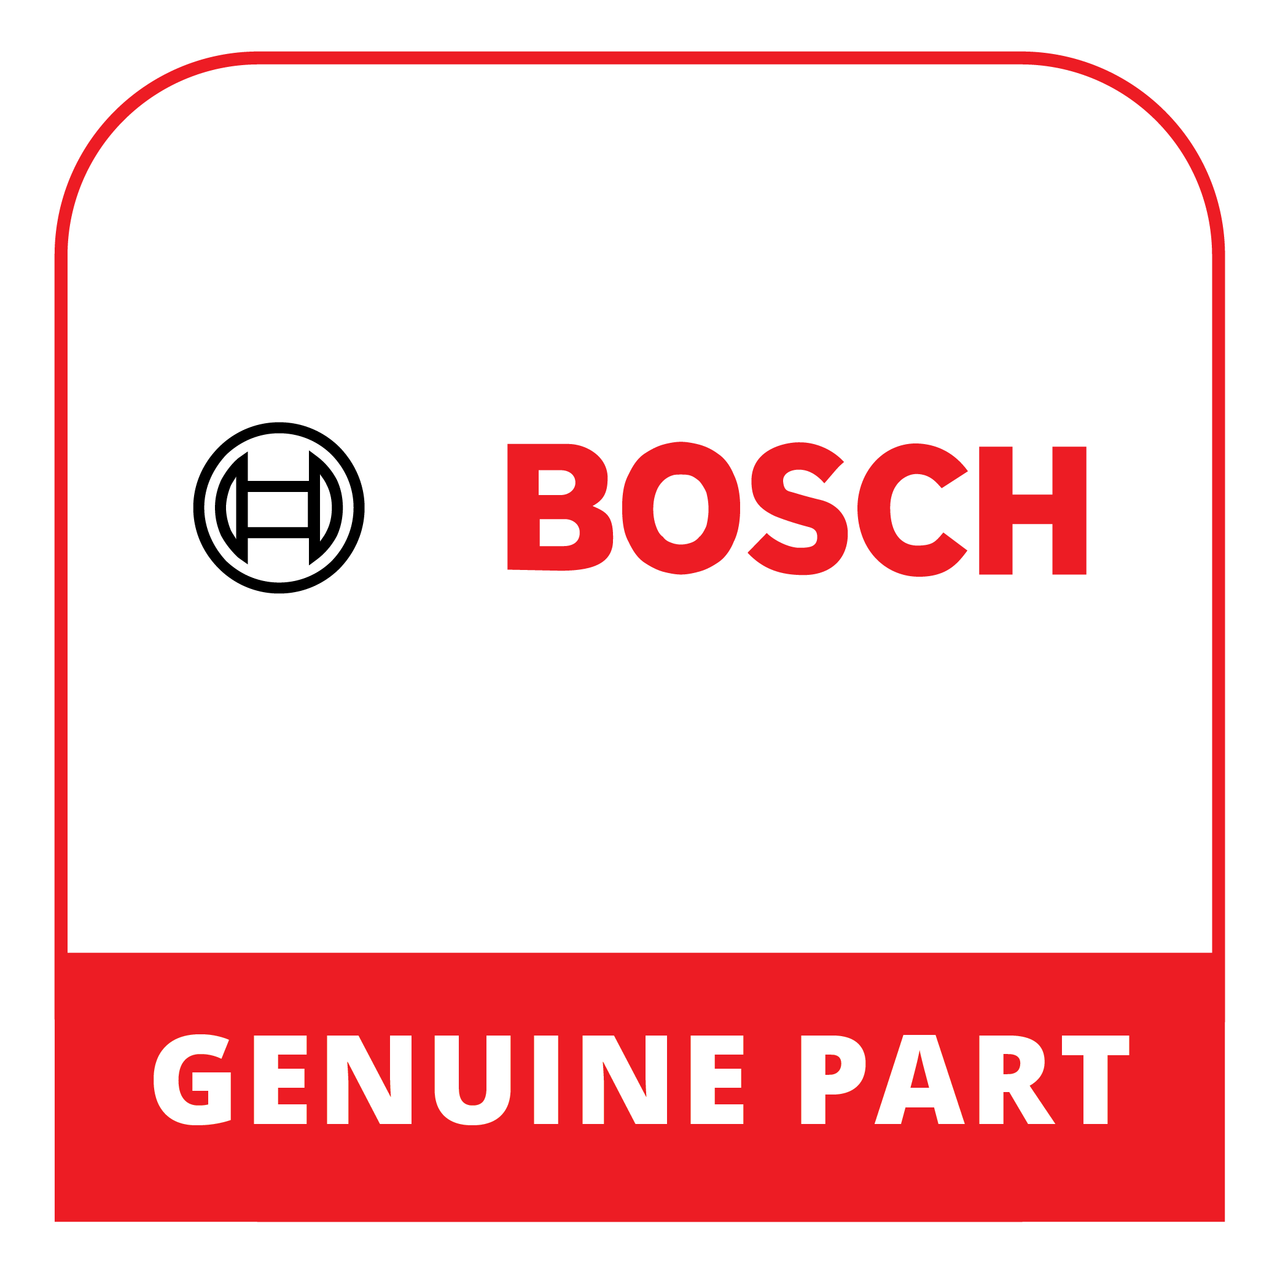 Bosch (Thermador) 00553043 - Instruction Manual - Genuine Bosch (Thermador) Part